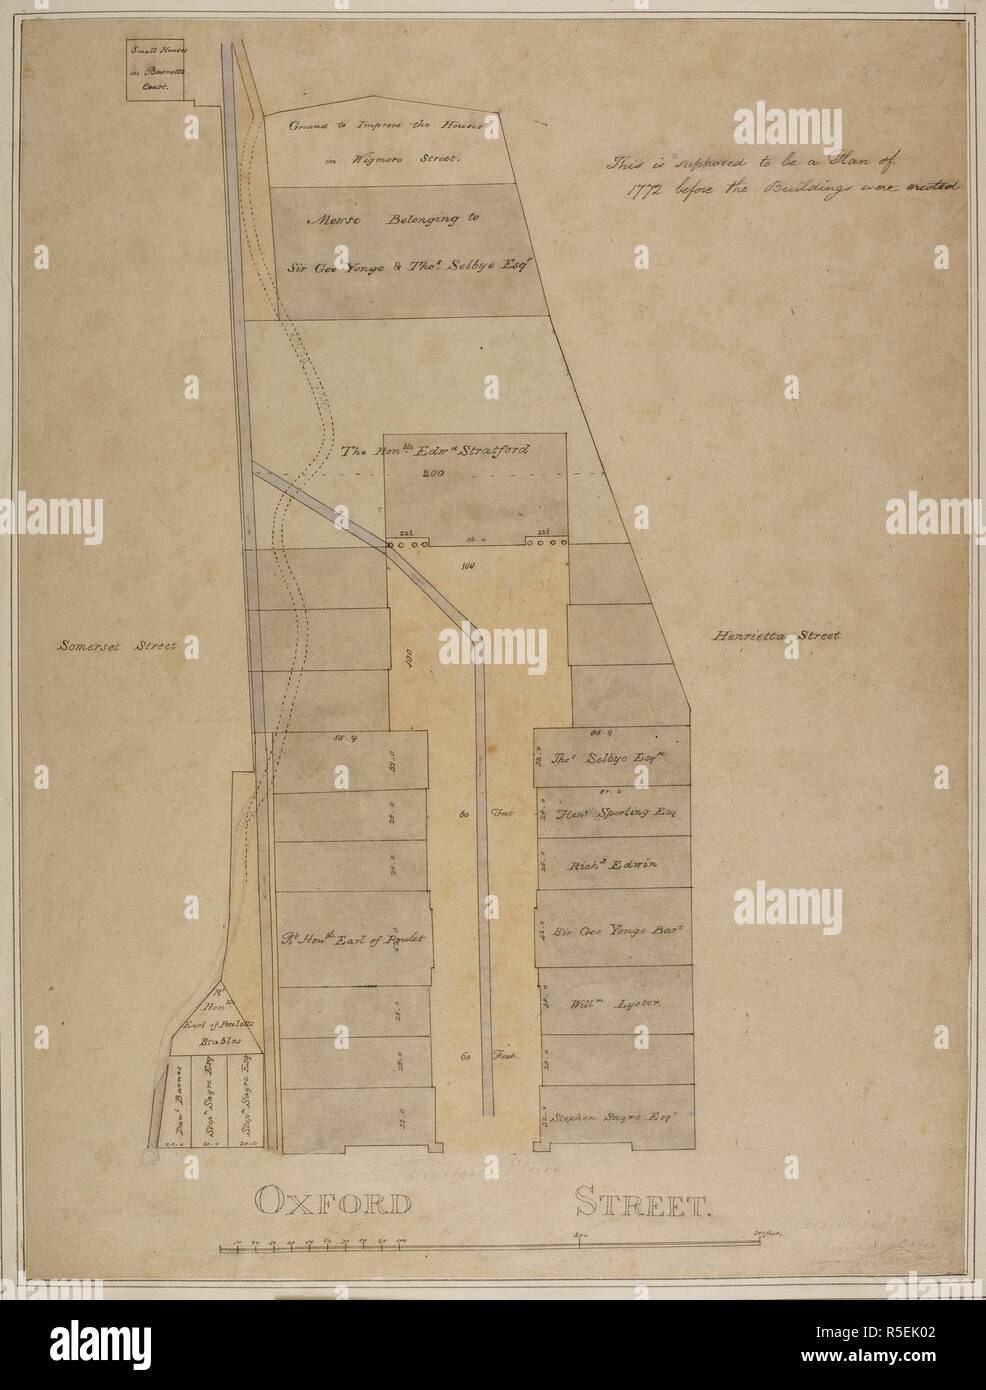 Drawn plan of Stratford Place, showing the houses &c. and the alteration of the sewer, 1772.  . 1772. [ca. 1800]. Pen and ink with wash on tracing paper with additions in pencil.   Copied from a plan of 1772; leaseholders' names and dimension of individual lots given; the course of Aye Brook indicated by pecked line.   1 plan : hand col. ; 45 x 33 cm; Scale not given.       . Source: Maps Crace.Port.14.24. Stock Photo